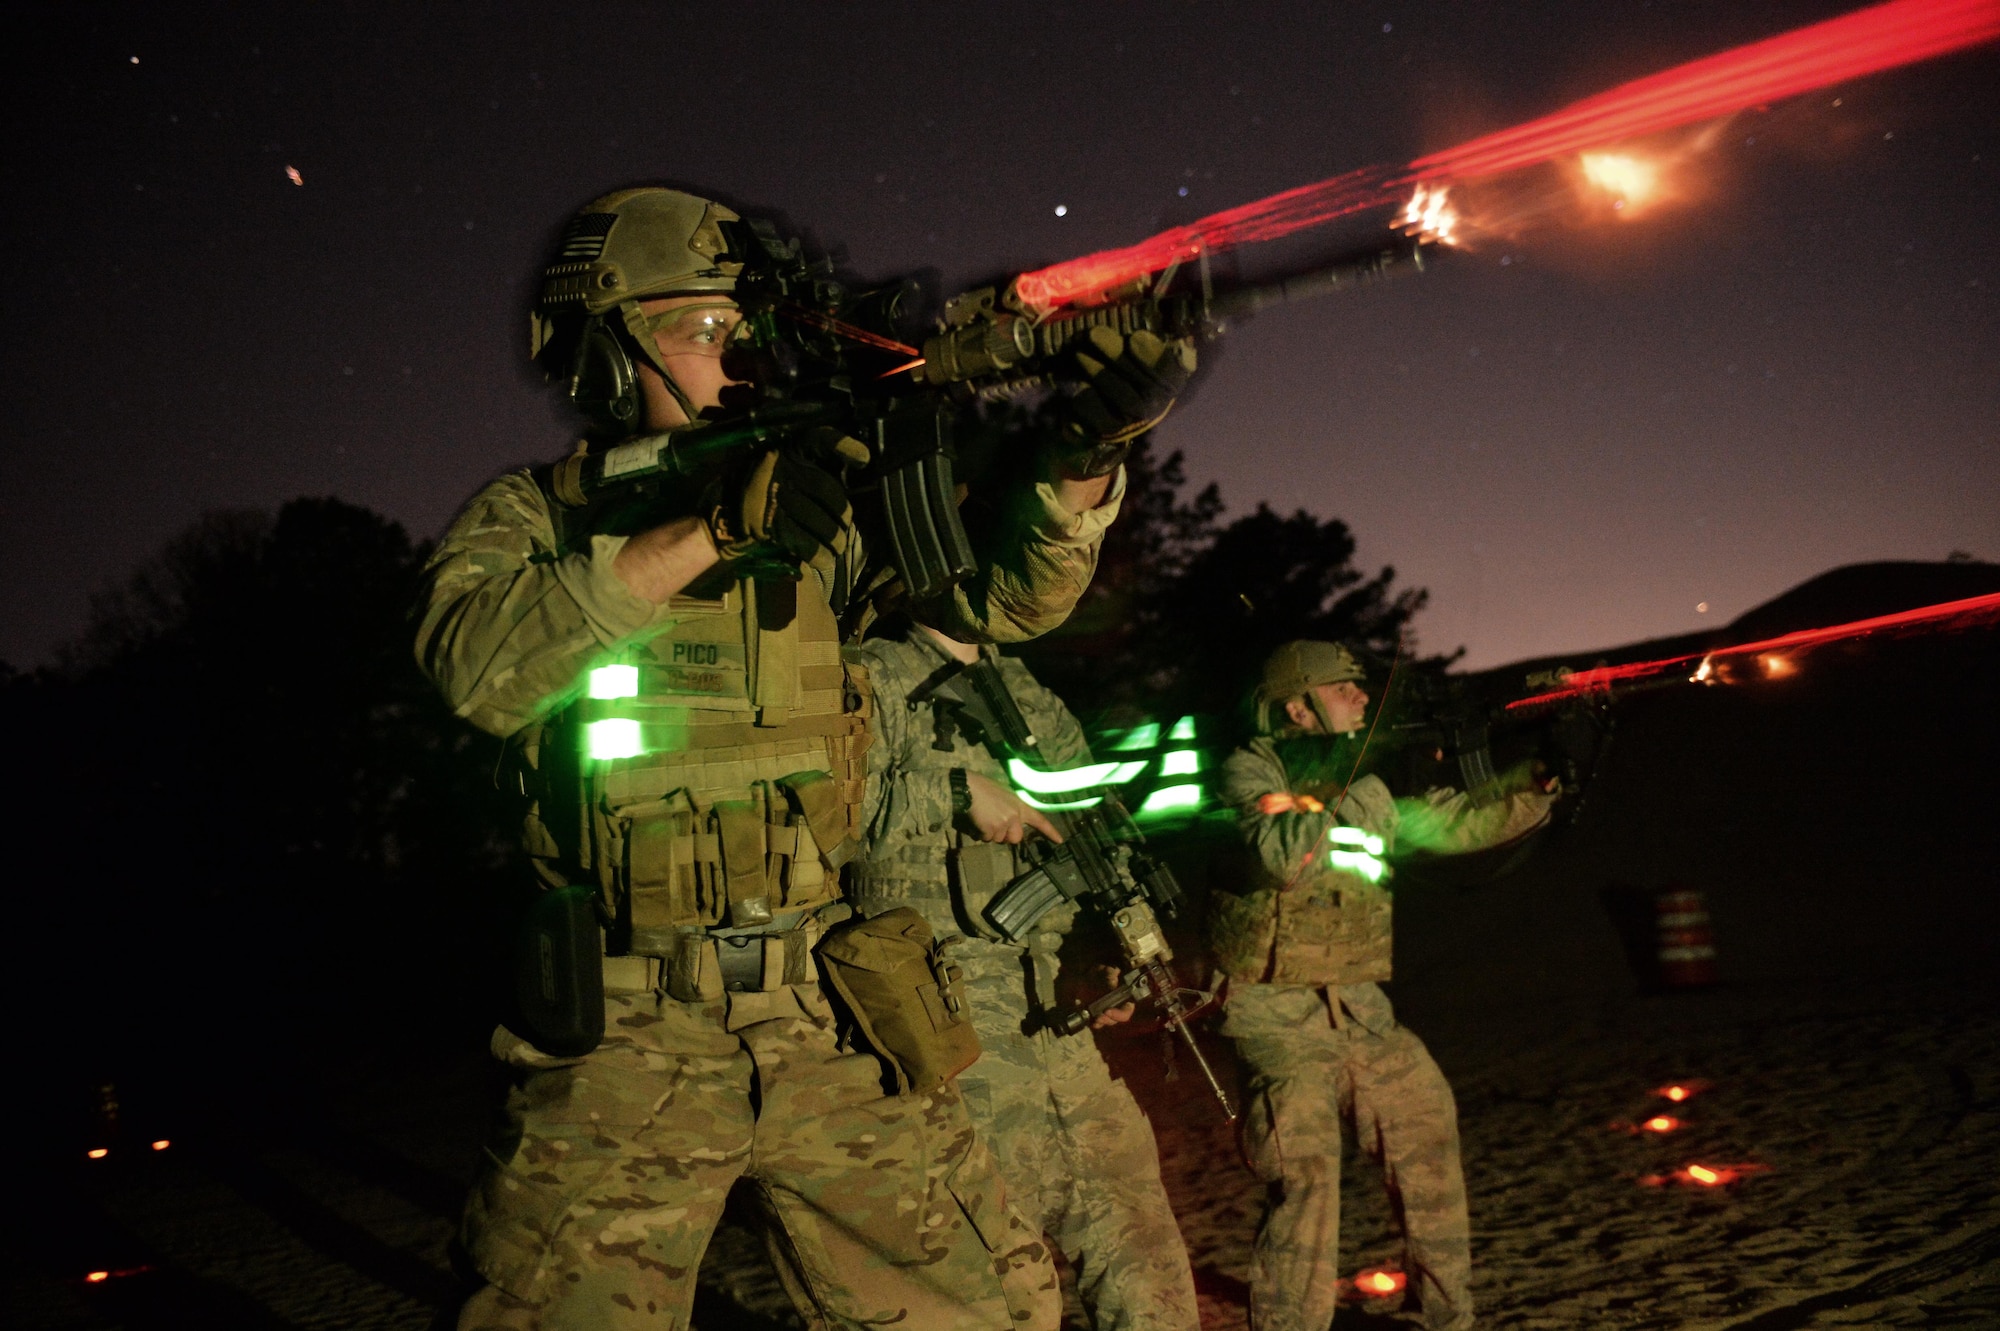 Staff Sgt. Joseph Pico, a security forces Airman with the 106th Rescue Wing, conducts night-firing training at the Suffolk County Police Range in Westhampton Beach, N.Y., May 7, 2015. During the training, Airmen learned small-group tactics, how to use their night vision gear and trained with visible and infrared designators. (New York Air National Guard photo/Staff Sgt. Christopher S. Muncy)